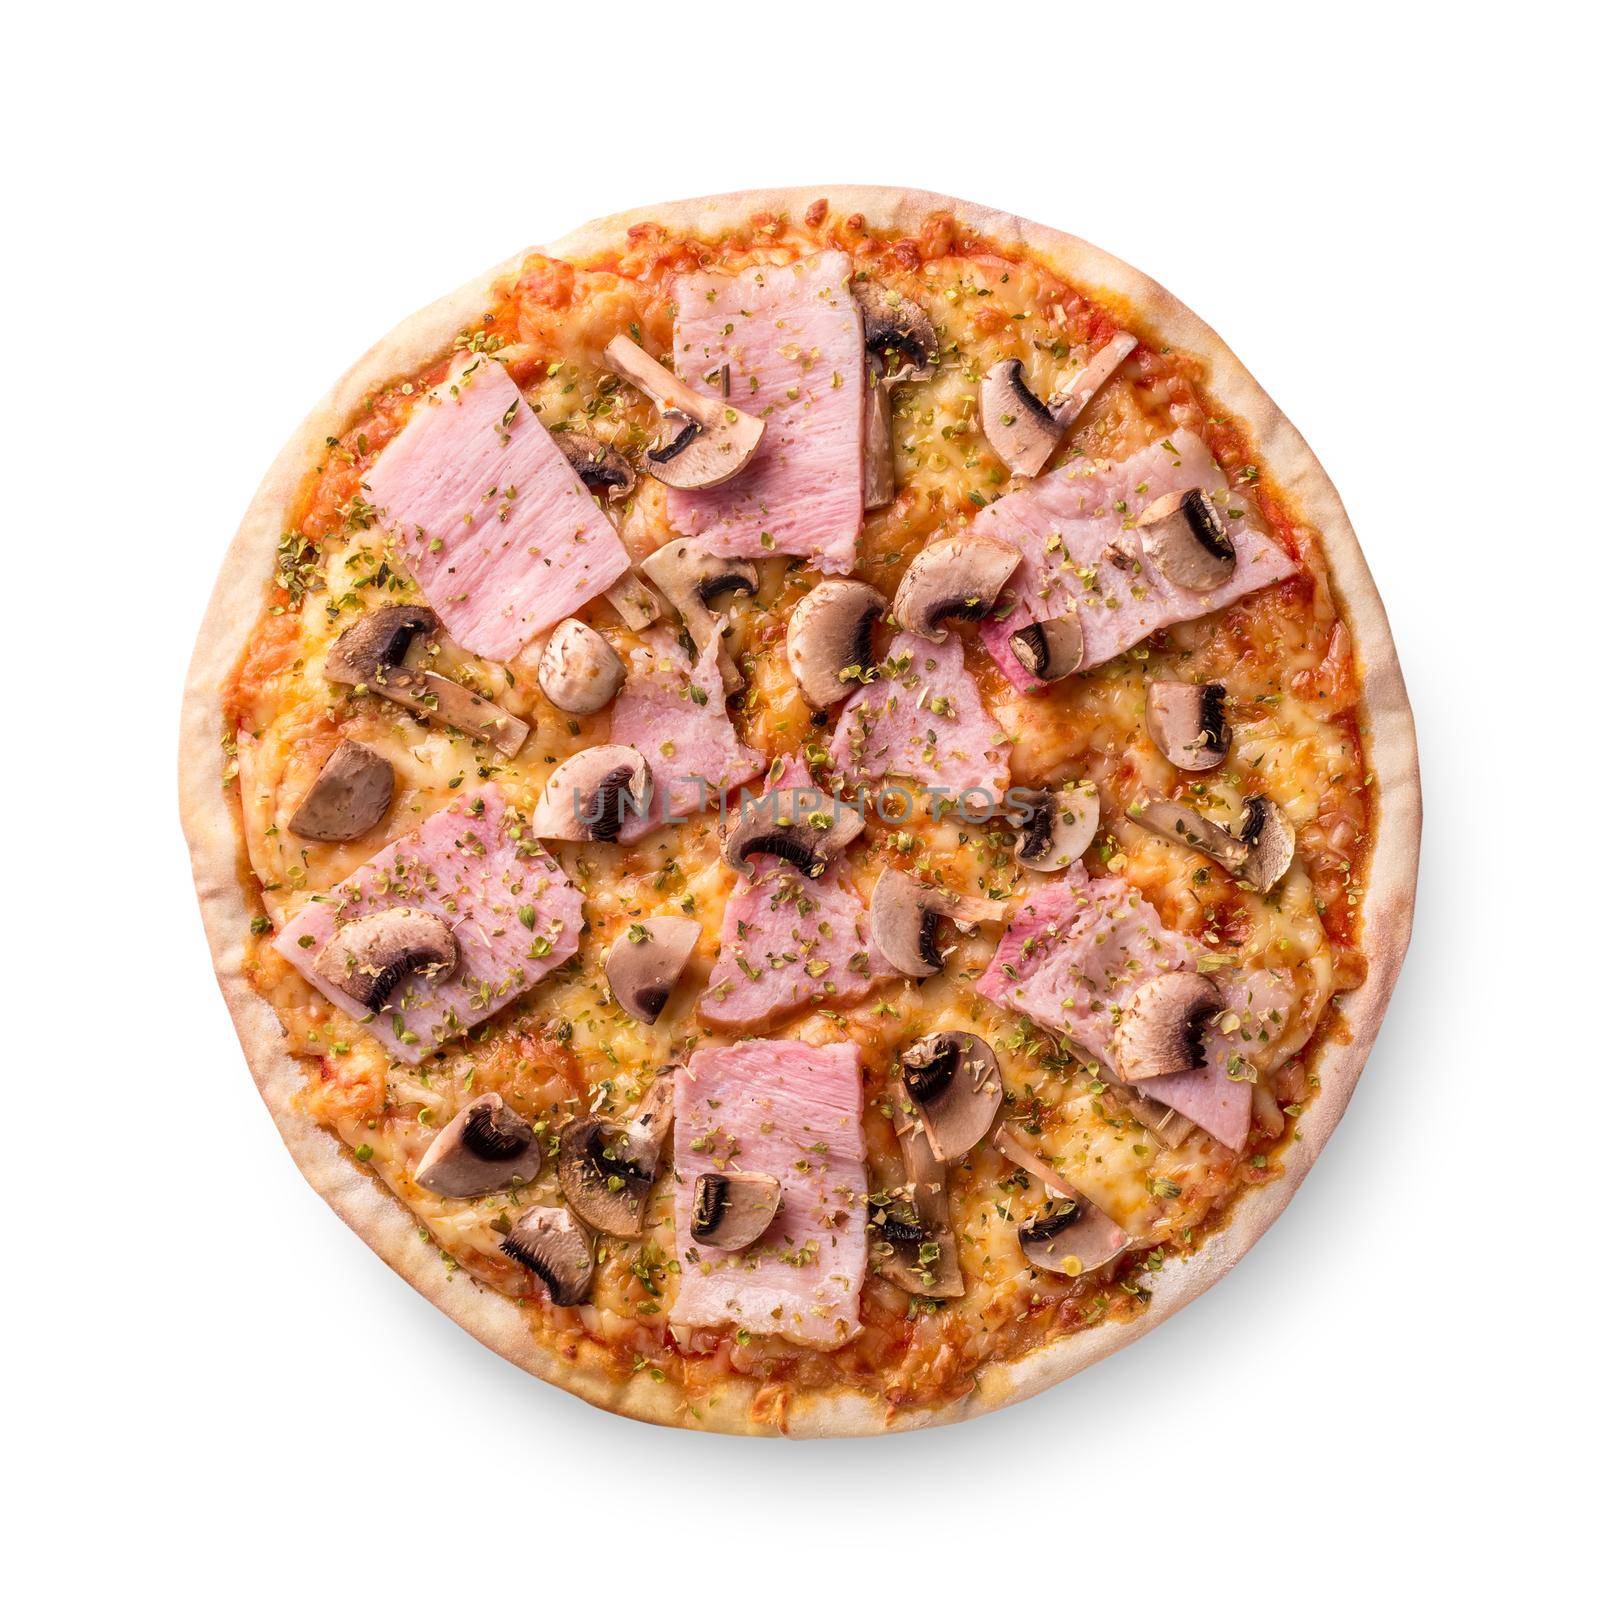 Fresh pizza with mushrooms, ham, cheese on white background. Copy space. Homemade with love. Fast delivery. Recipe and menu. Top view.